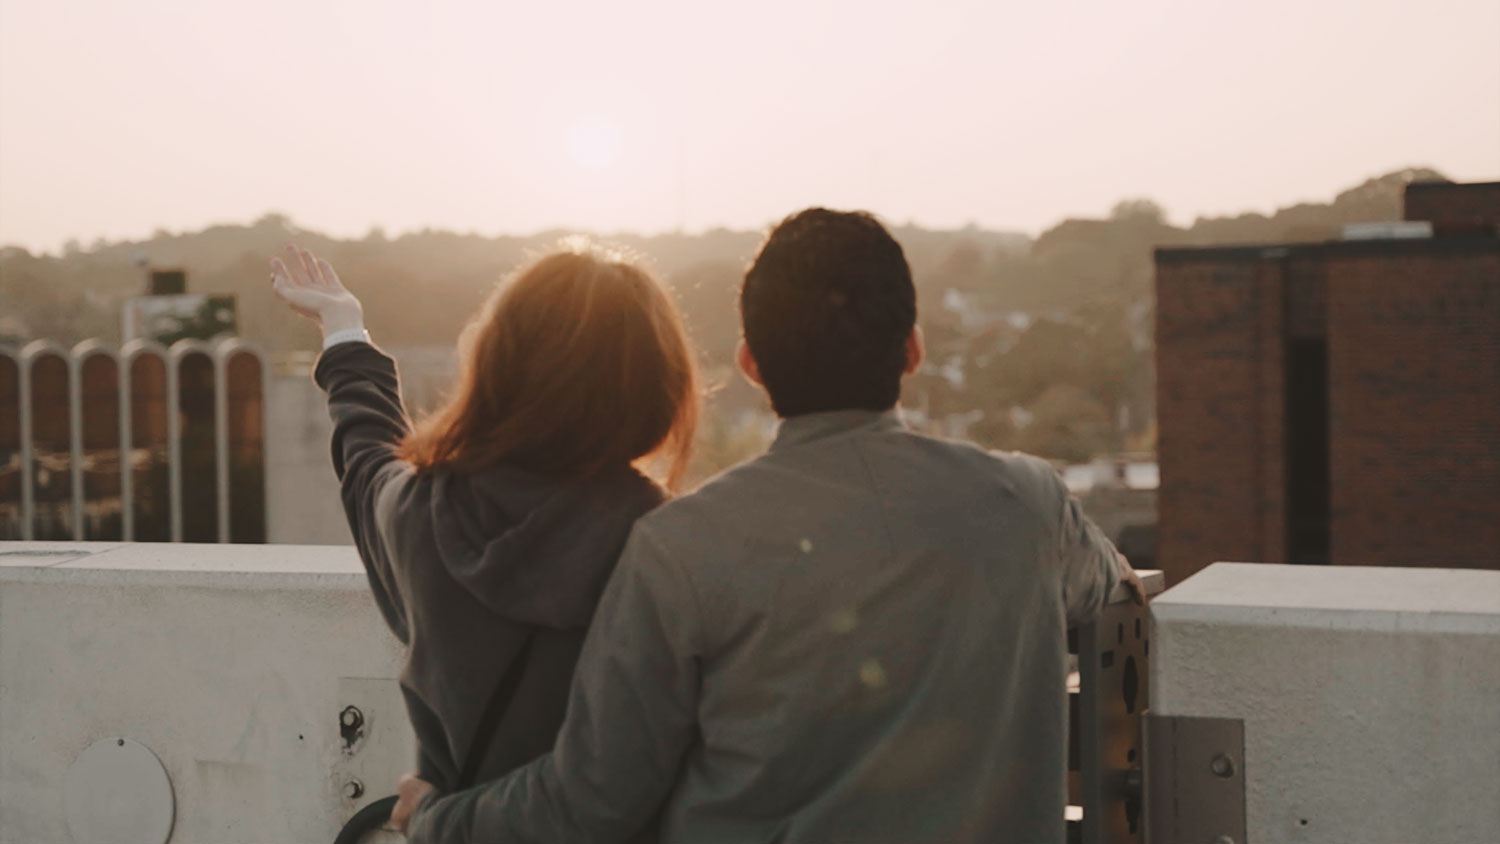 Couple looking out over a city skyline.